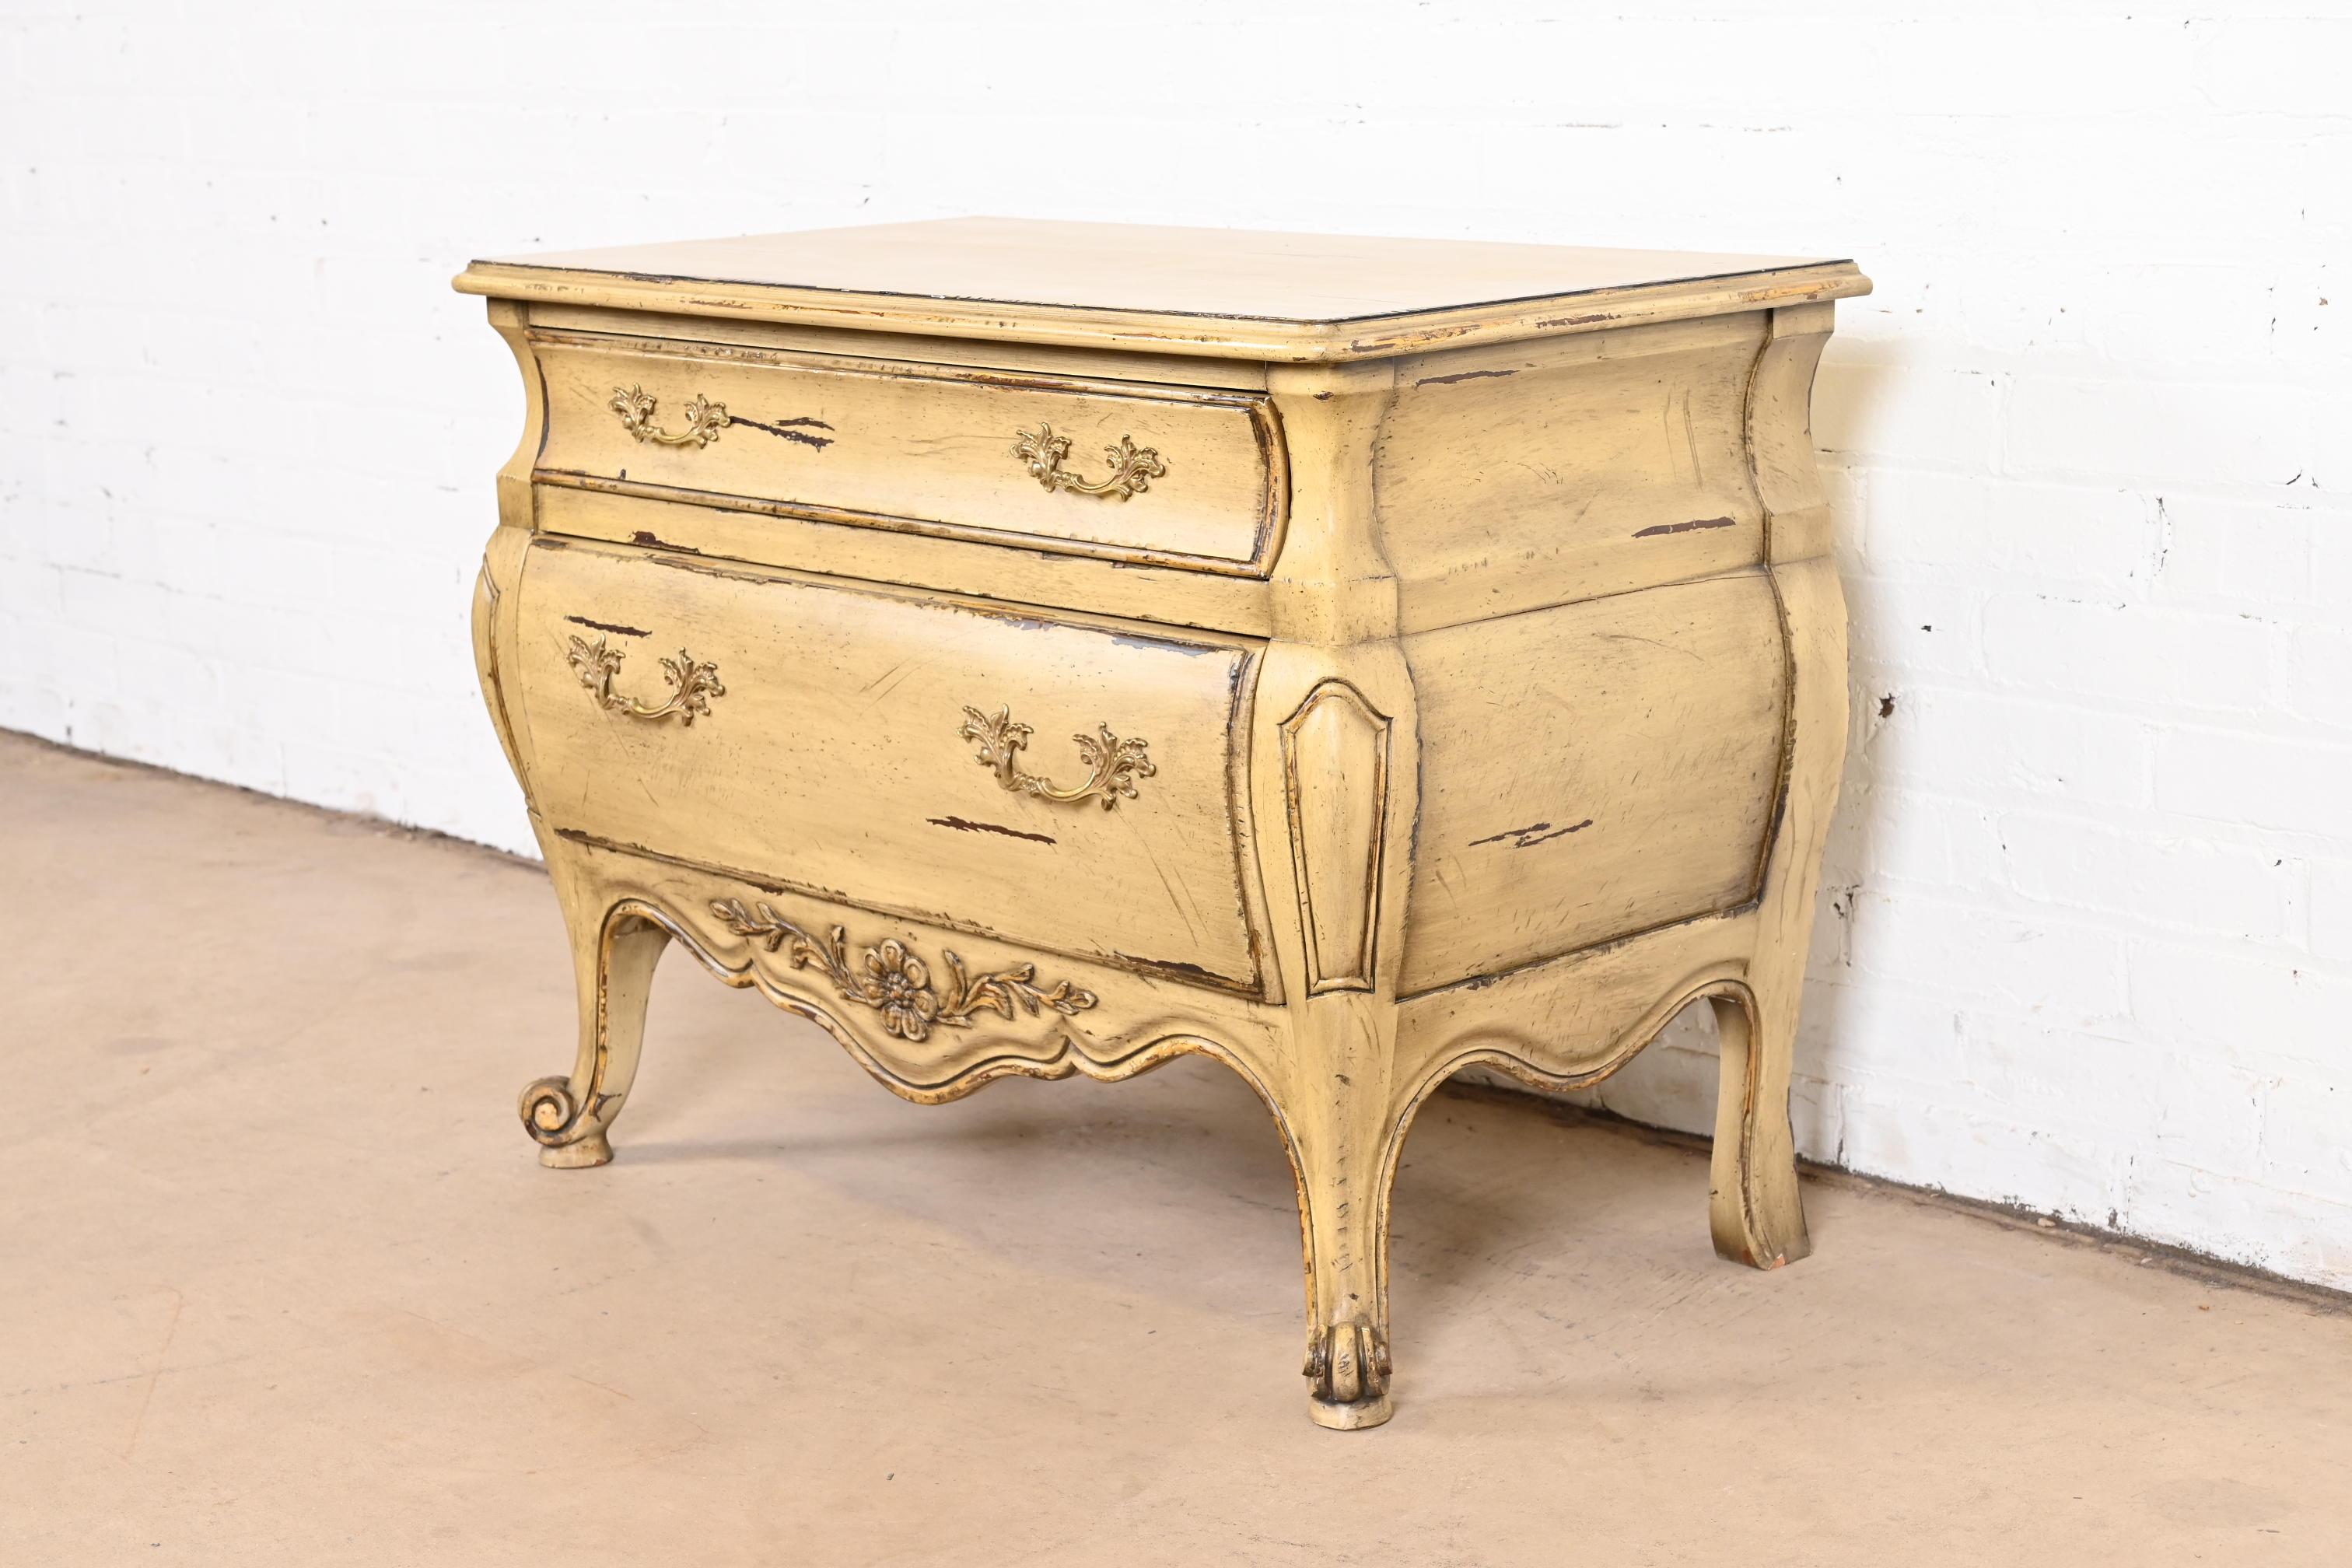 A gorgeous French Provincial Louis XV style carved two-drawer commode or bedside chest of drawers

By John Widdicomb

USA, Late 20th Century

Solid carved walnut, with original painted and gold gilt finish and brass hardware.

Measures: 32